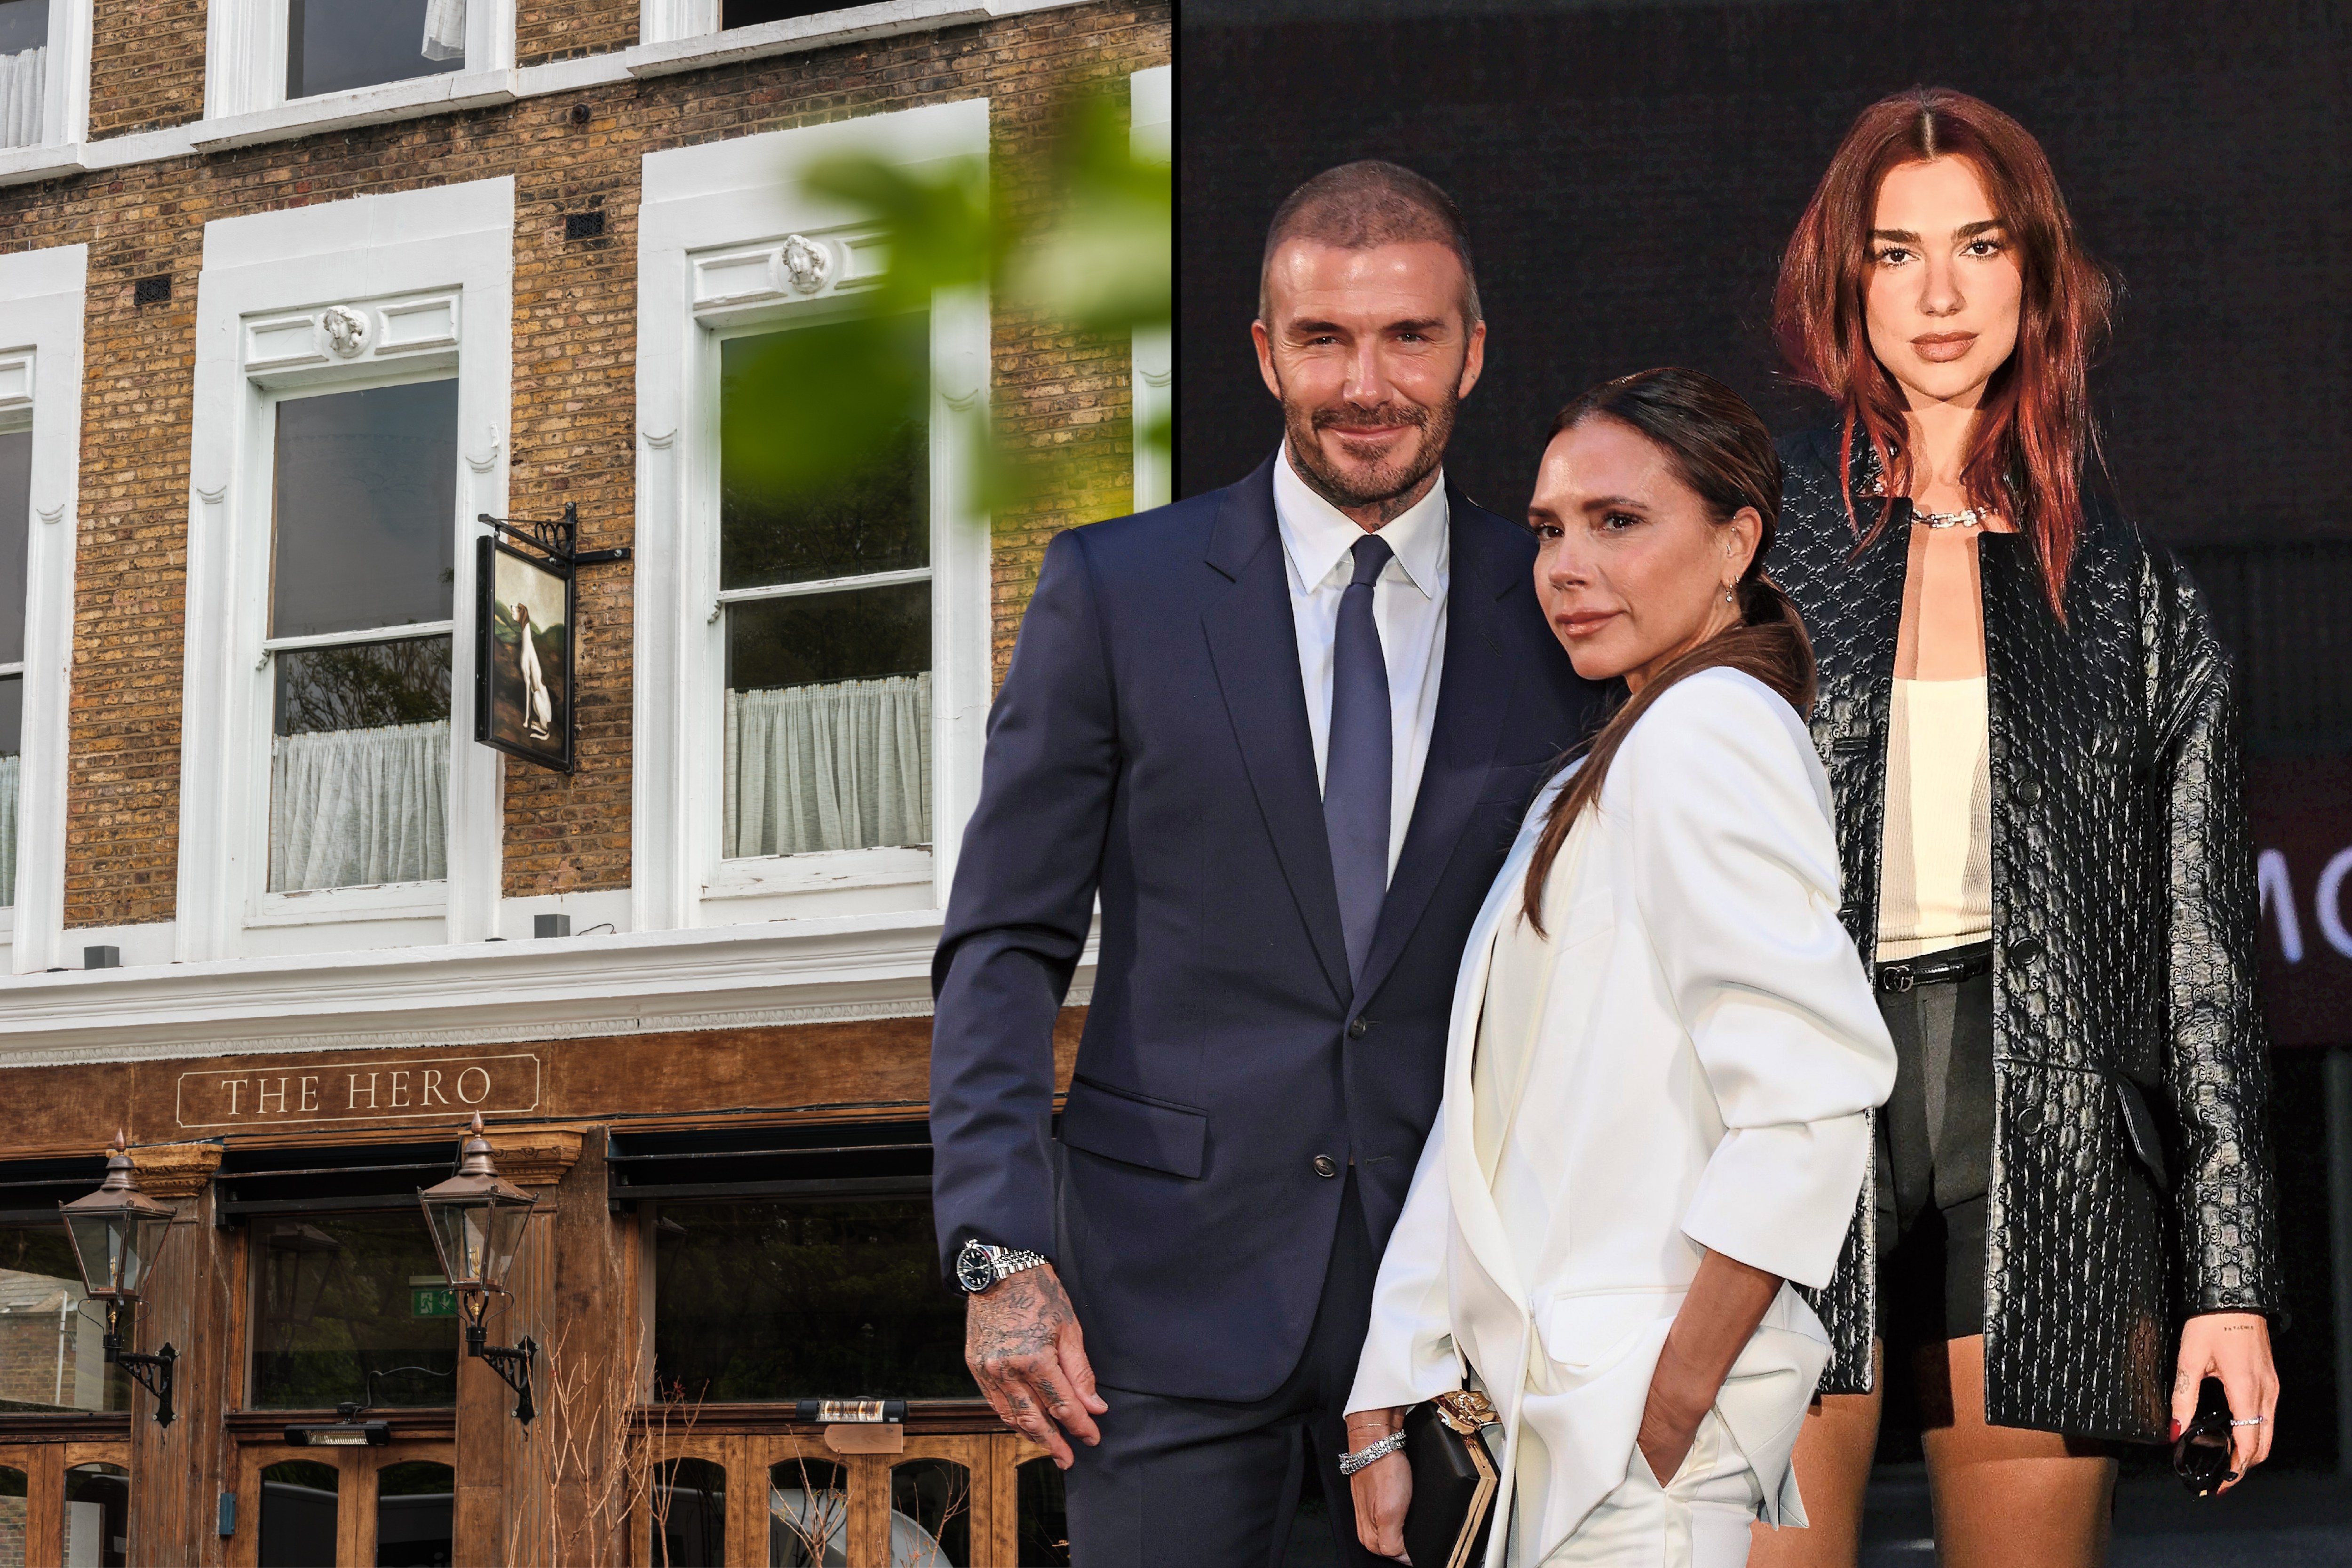 The Hero in Maida Vale; the Beckhams have been seen at the Bull, Charlbury, while Dua Lipa is a regular at the Pelican